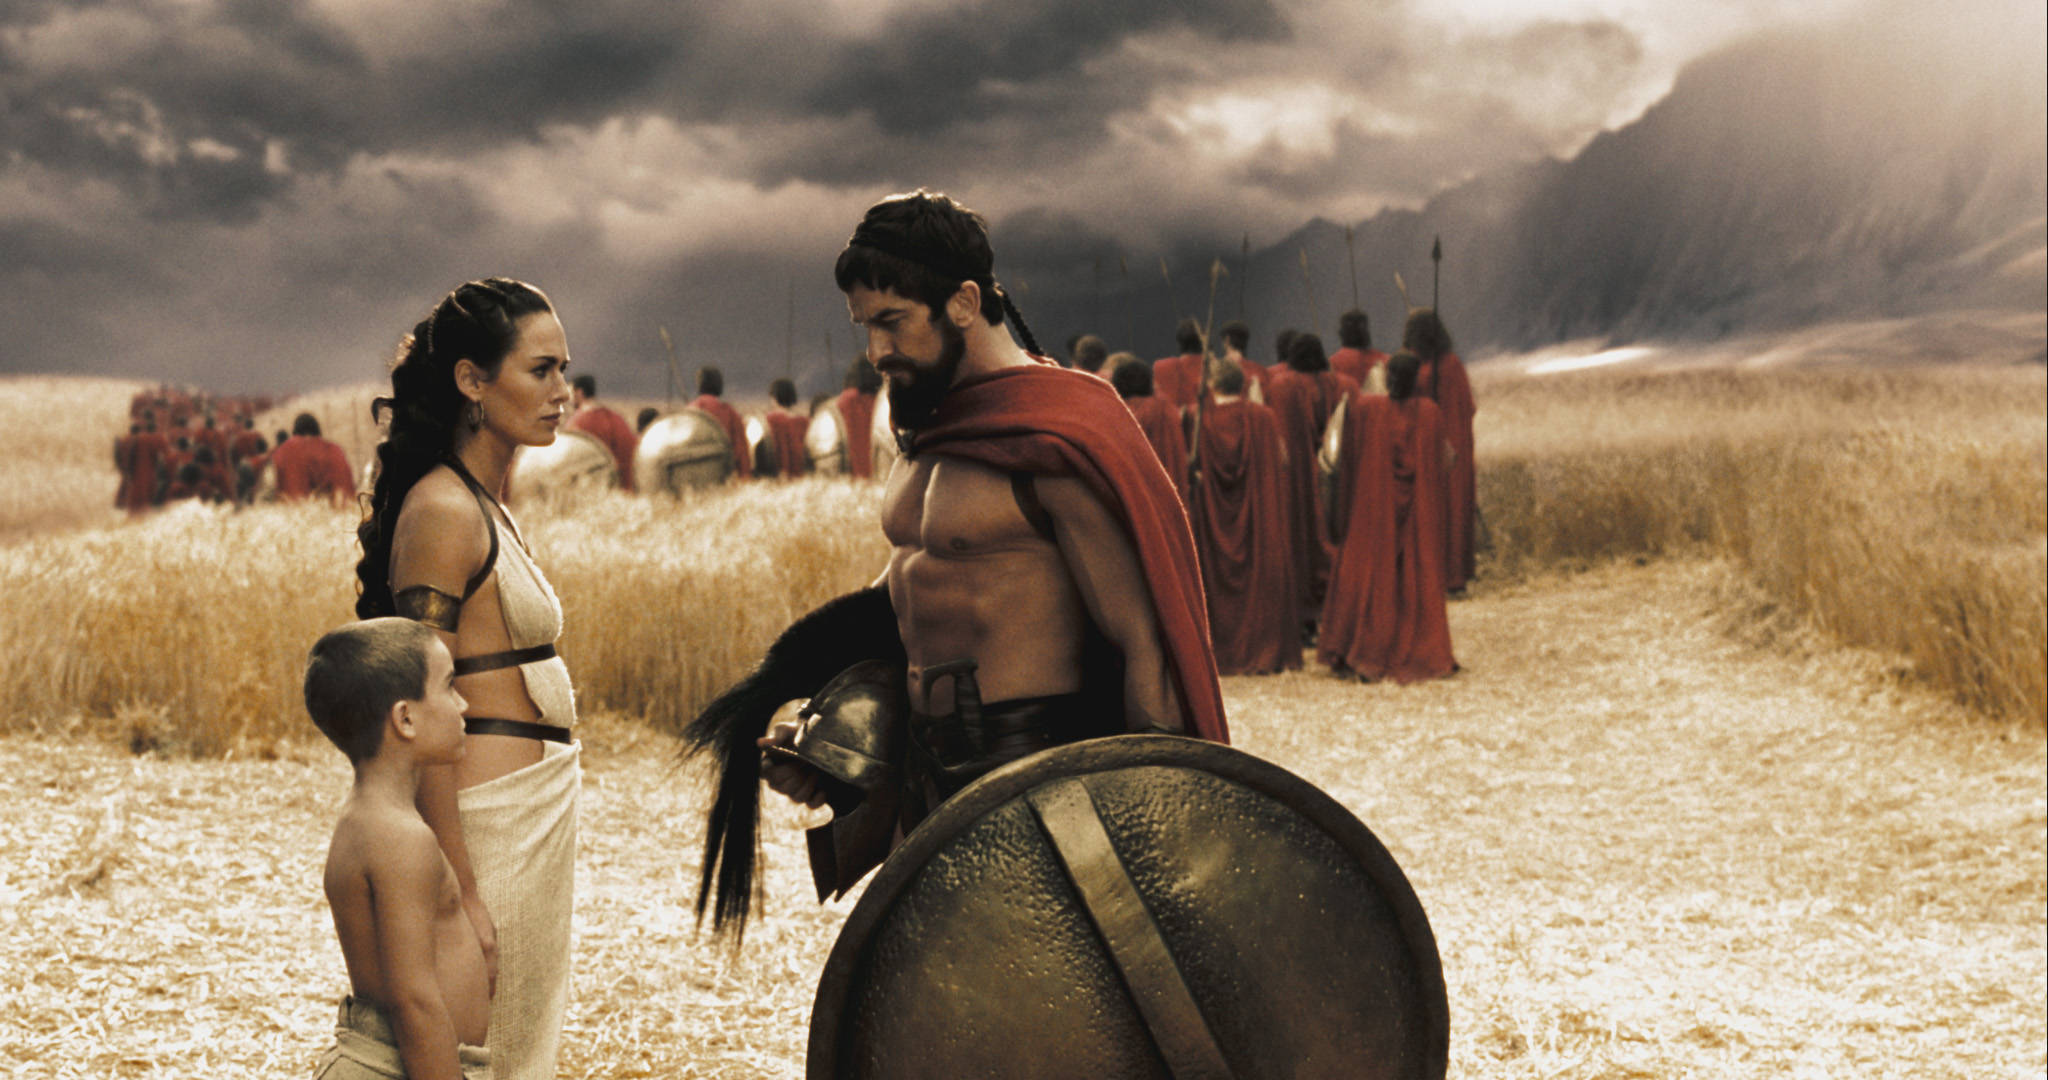 300 - Thermopylae and Rise of an Empire-5. GORGO